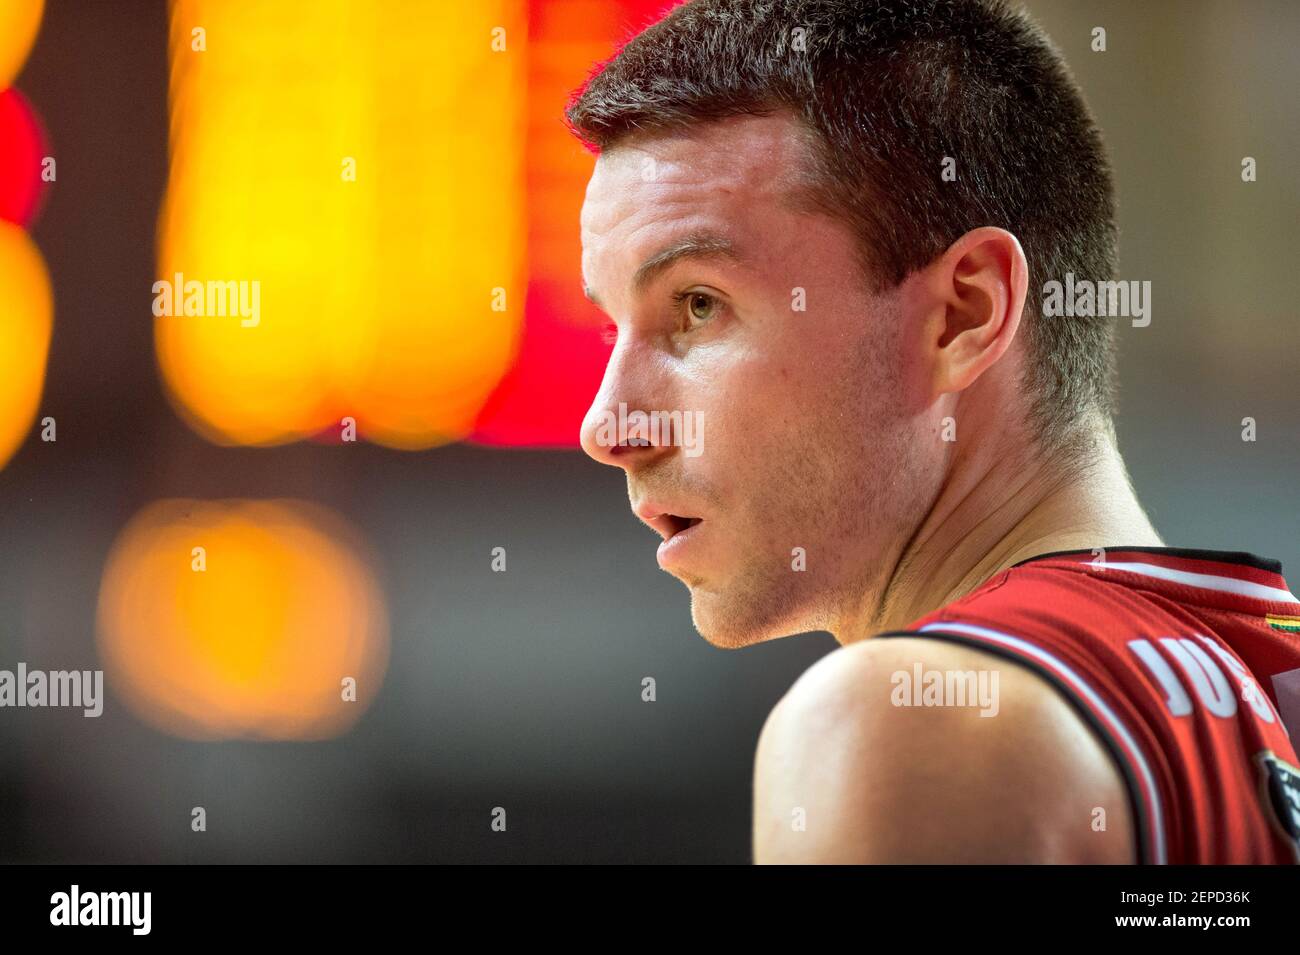 2014-12-08. Adas Juskevicius of Lithuania. Stock Photo